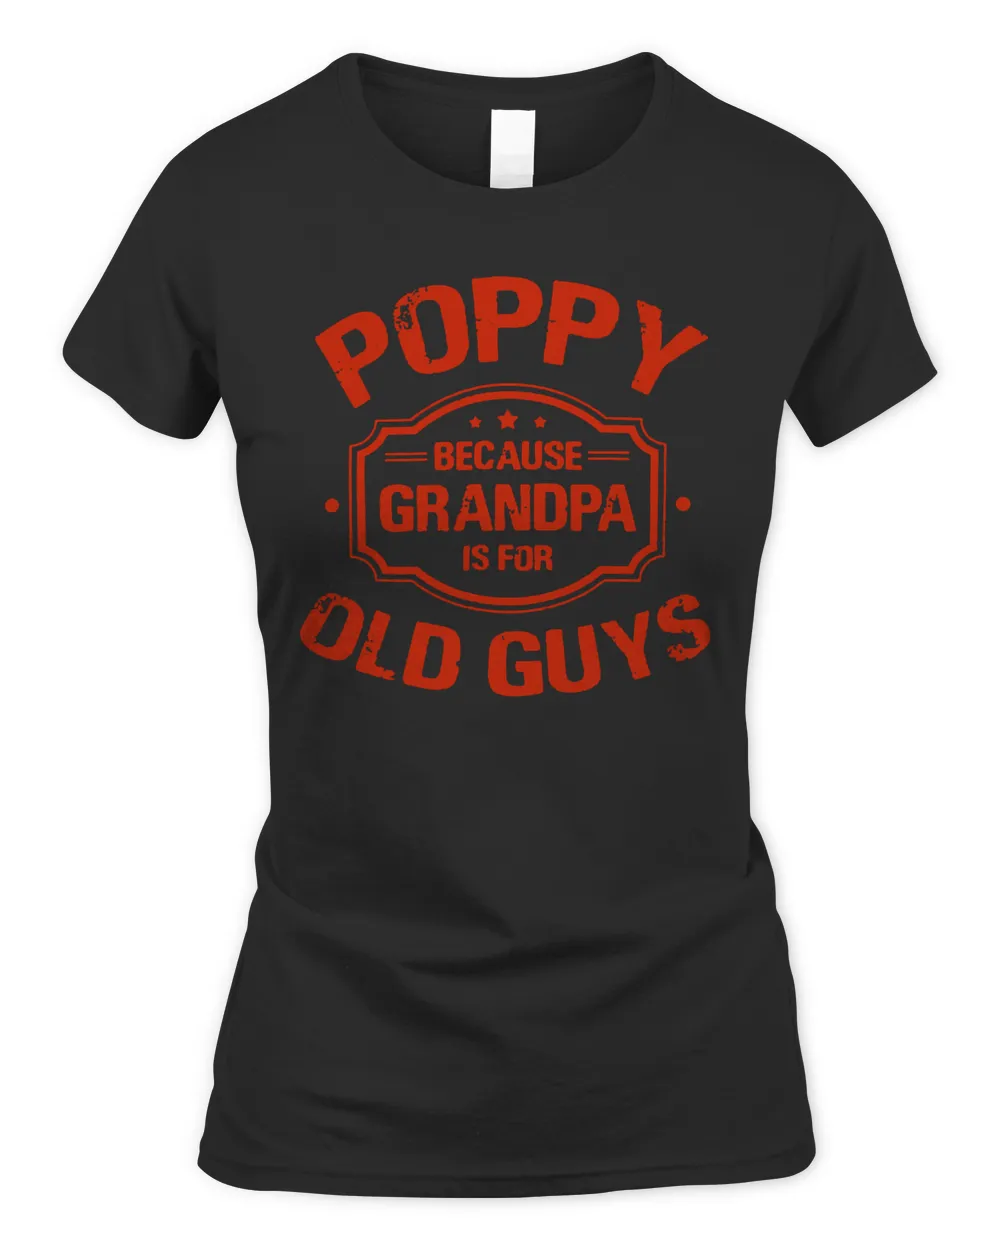 Father's Day Gift Ideas - Poppy Because Grandpa Is For Old Guys